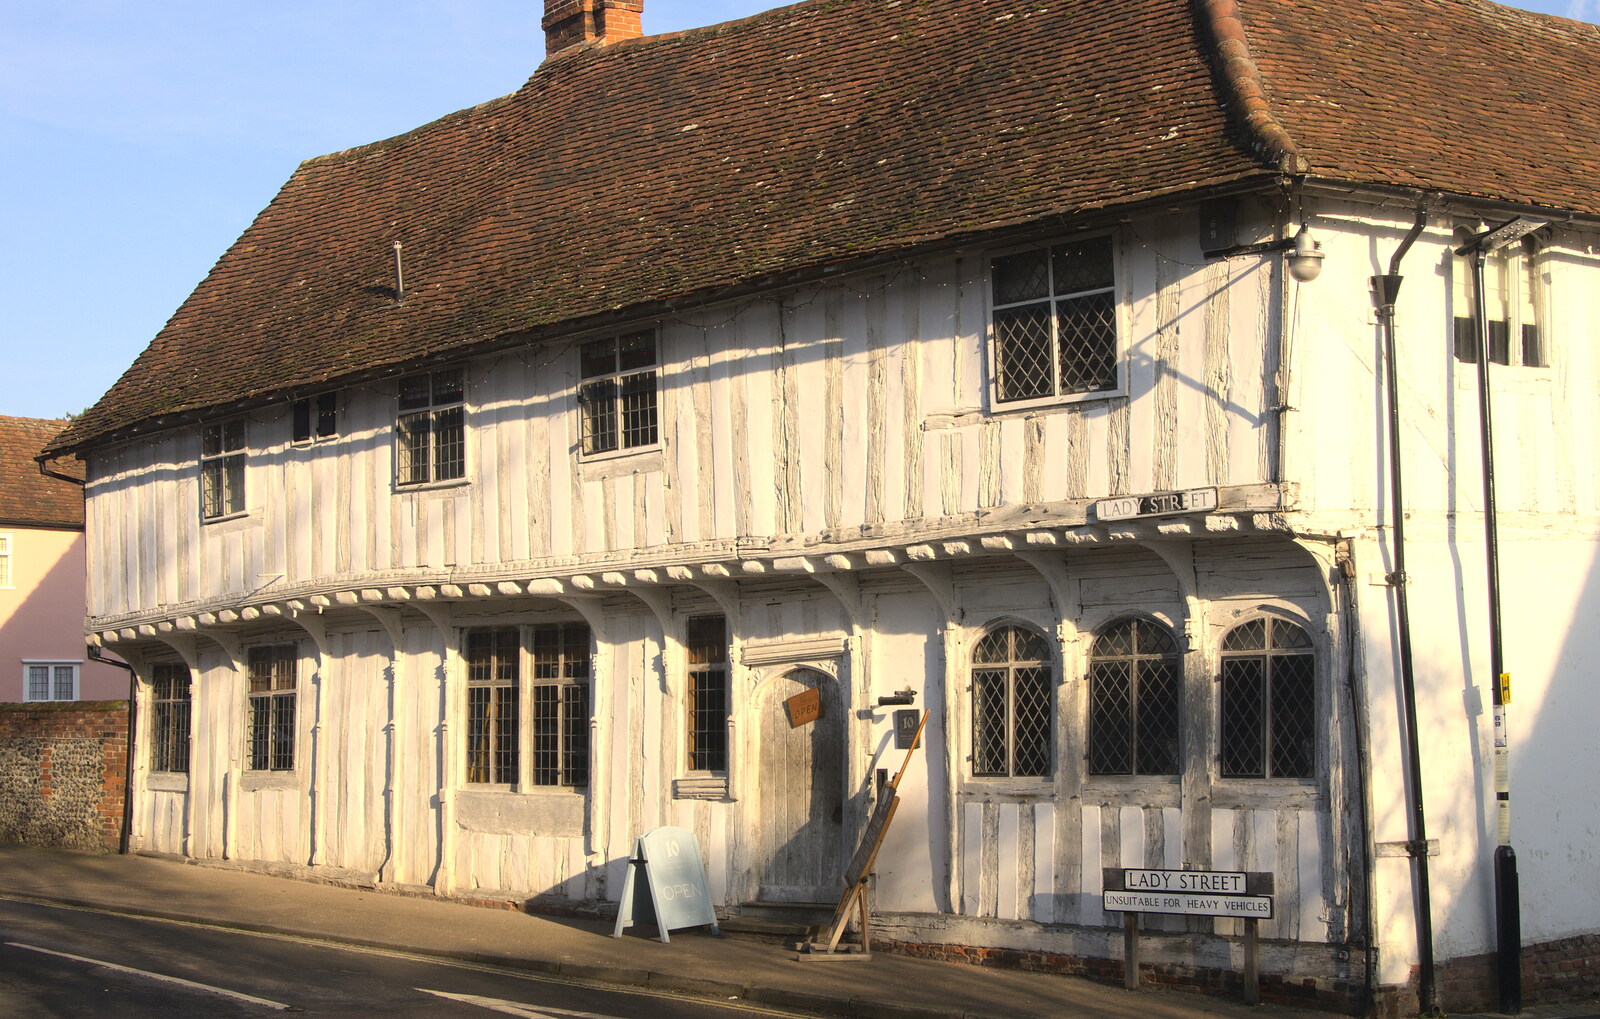 A timber-framed house on Lady Street from A Day in Lavenham, Suffolk - 22nd January 2017